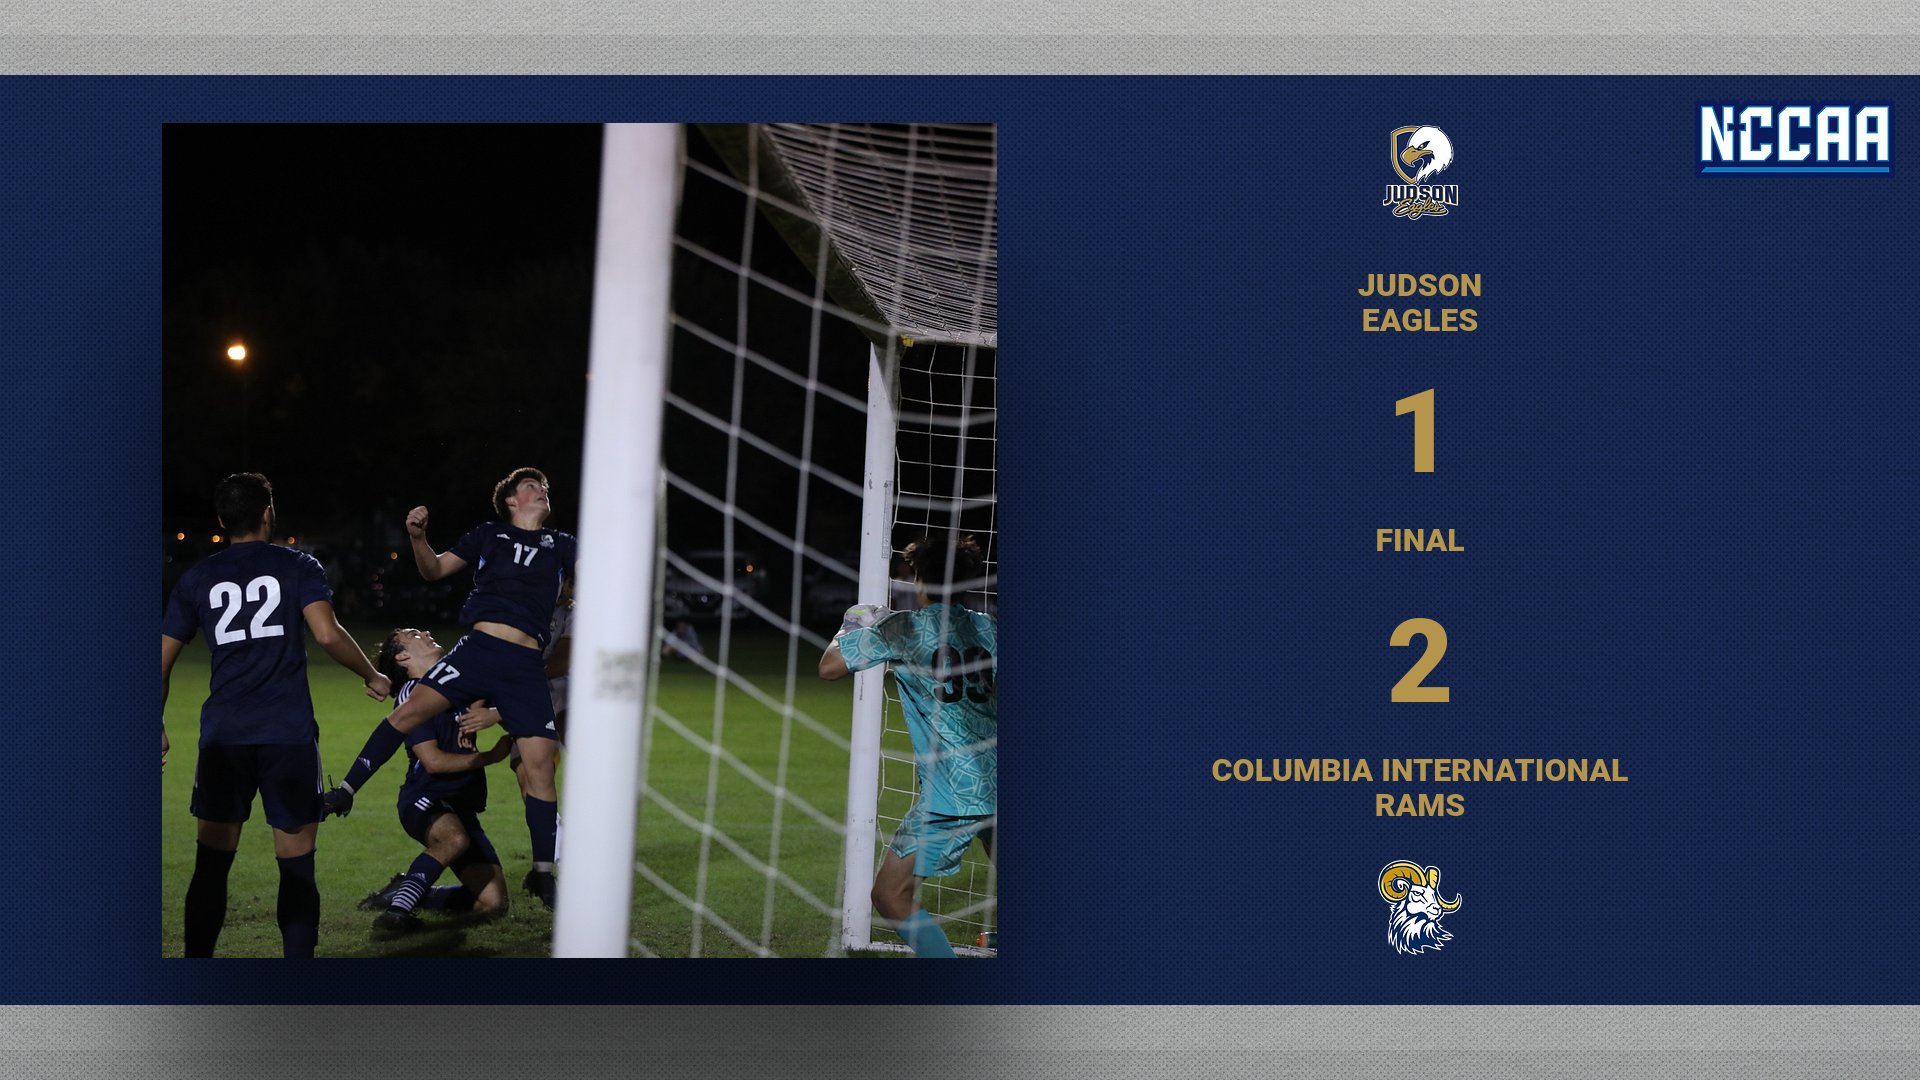 Eagles Unable to Hold Late Lead as CIU Scores Twice to Defeat Judson 2-1 to Begin NCCAA Play